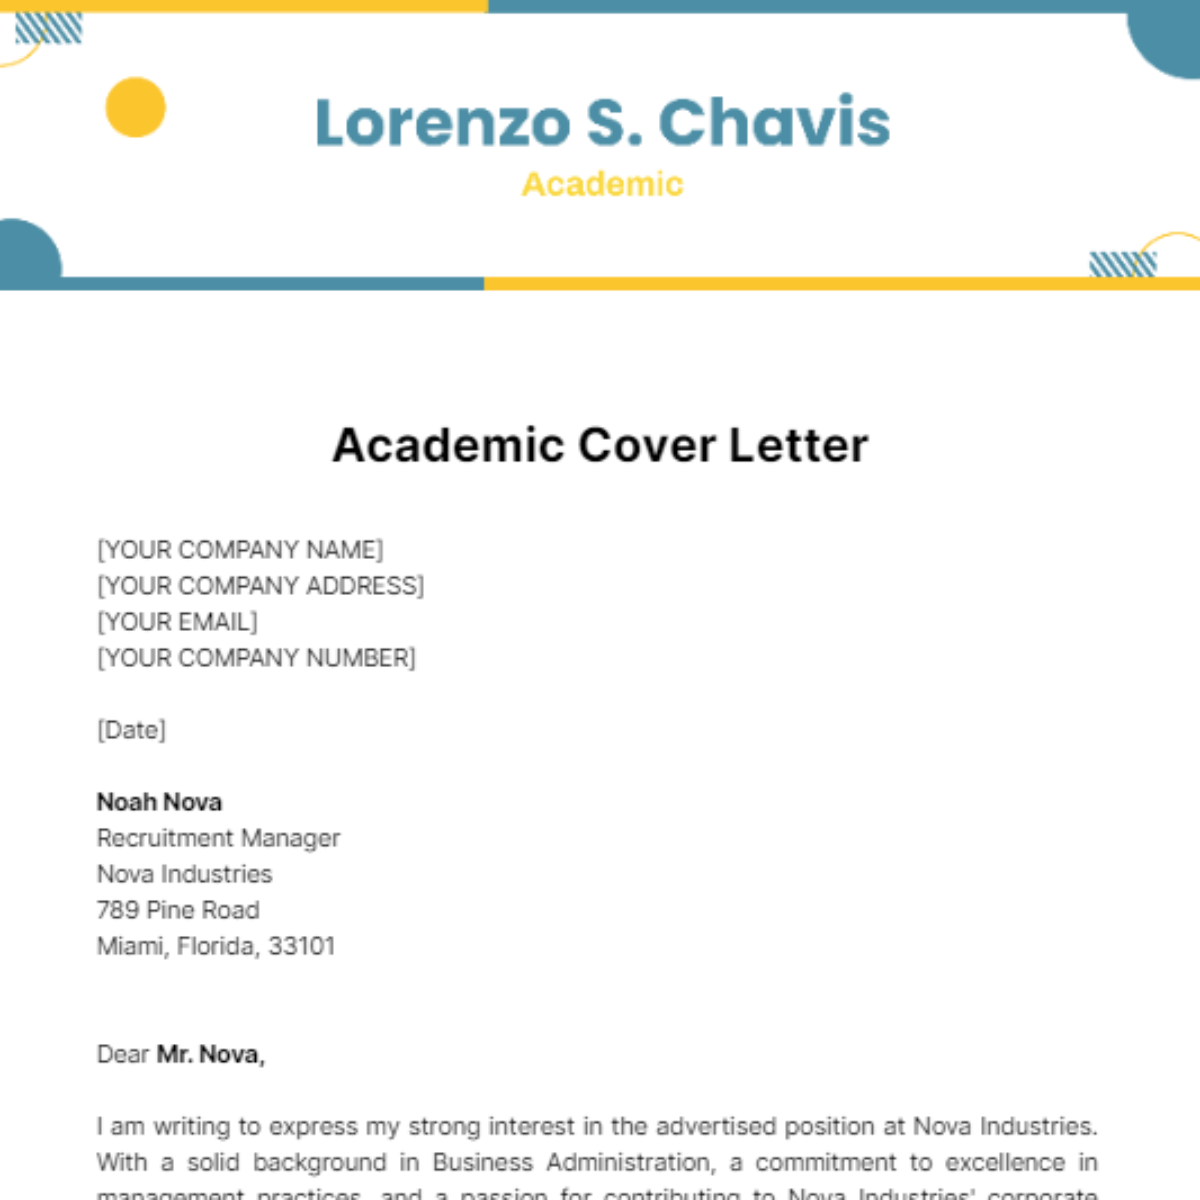 Academic Cover Letter Template